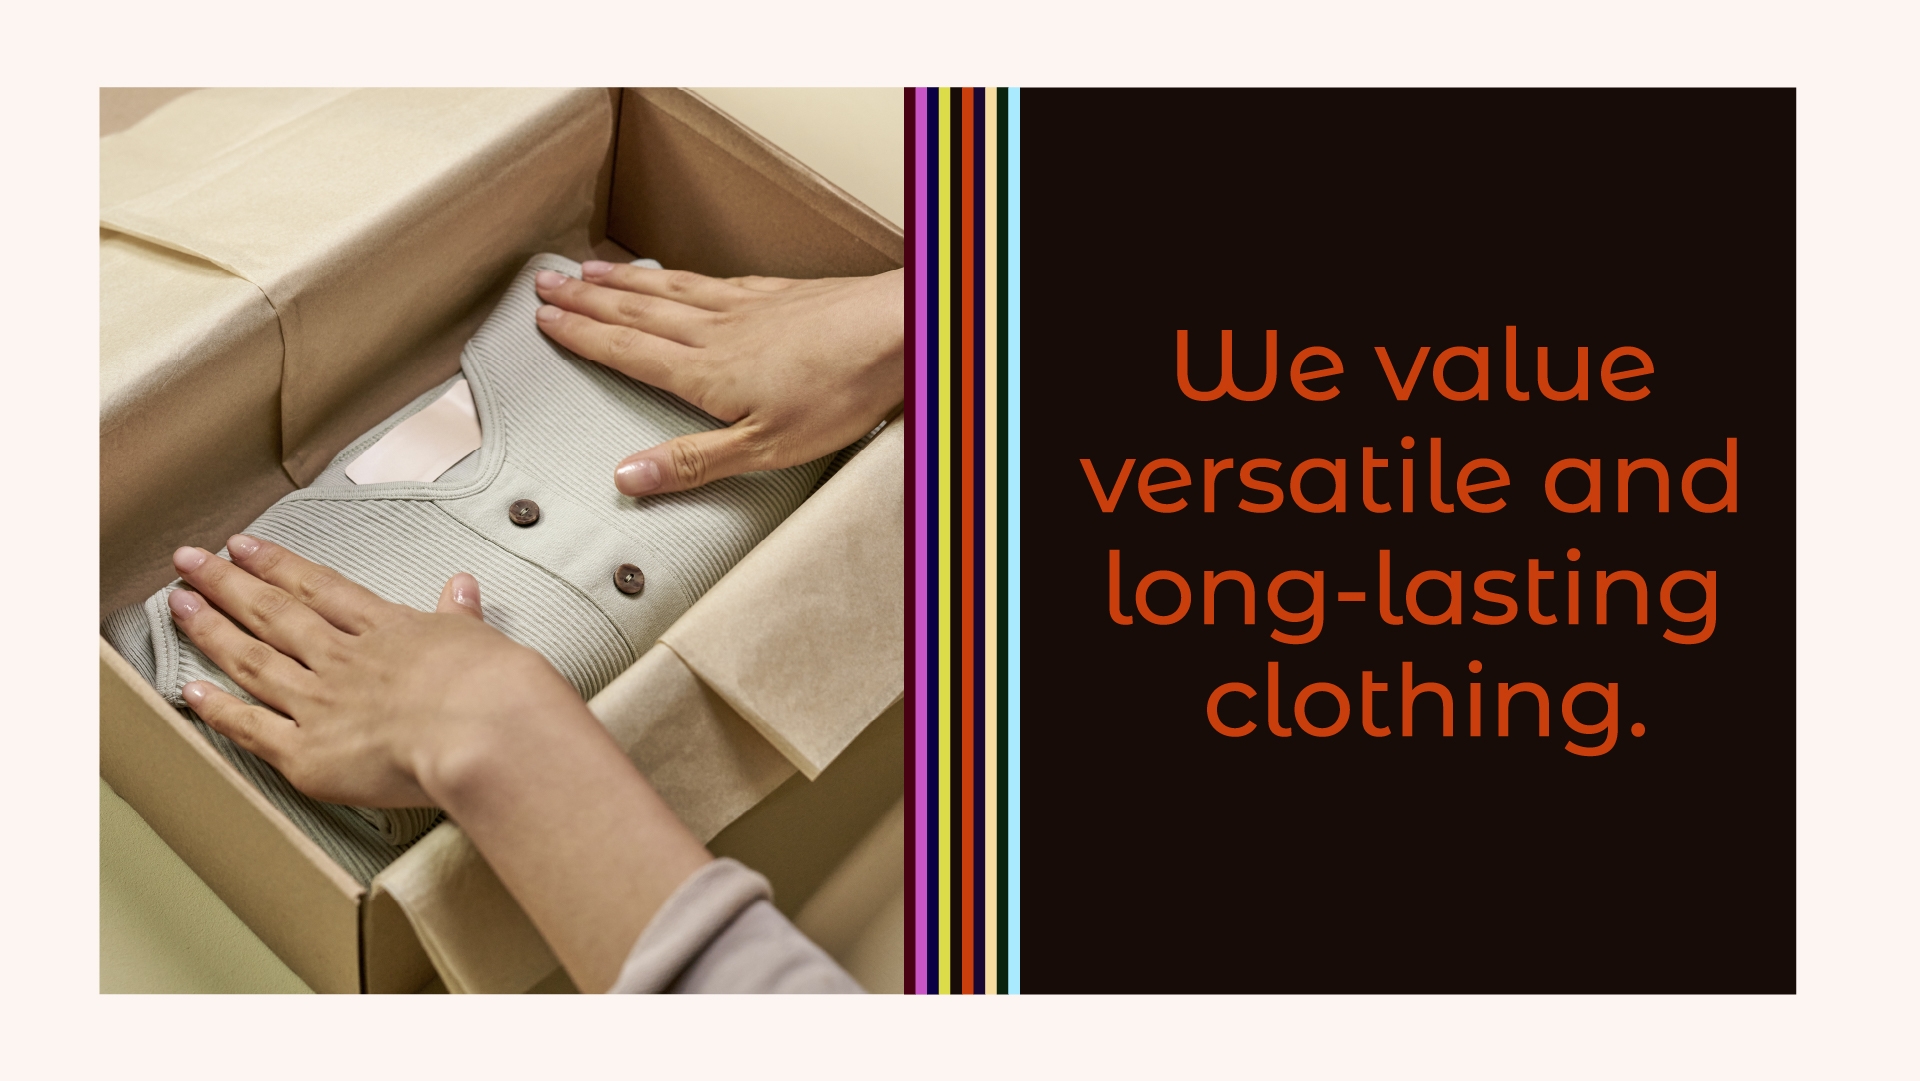 We value versatile and long-lasting clothing.